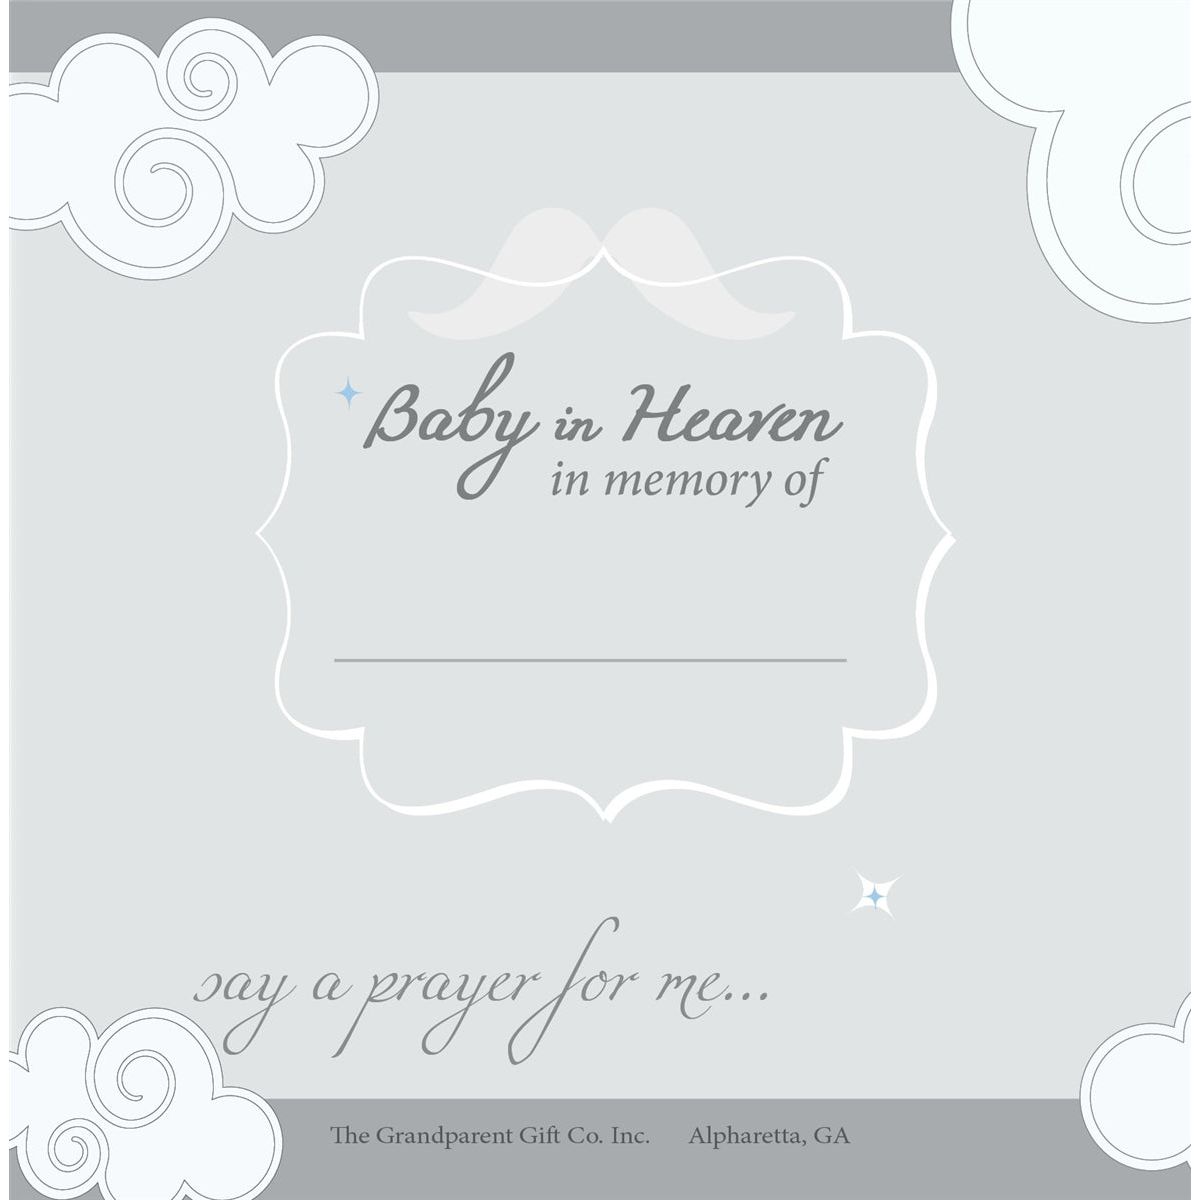 The back of the sentiment card with &quot;Baby in Heaven in memory of&quot; with a space to write the baby&#39;s name.  